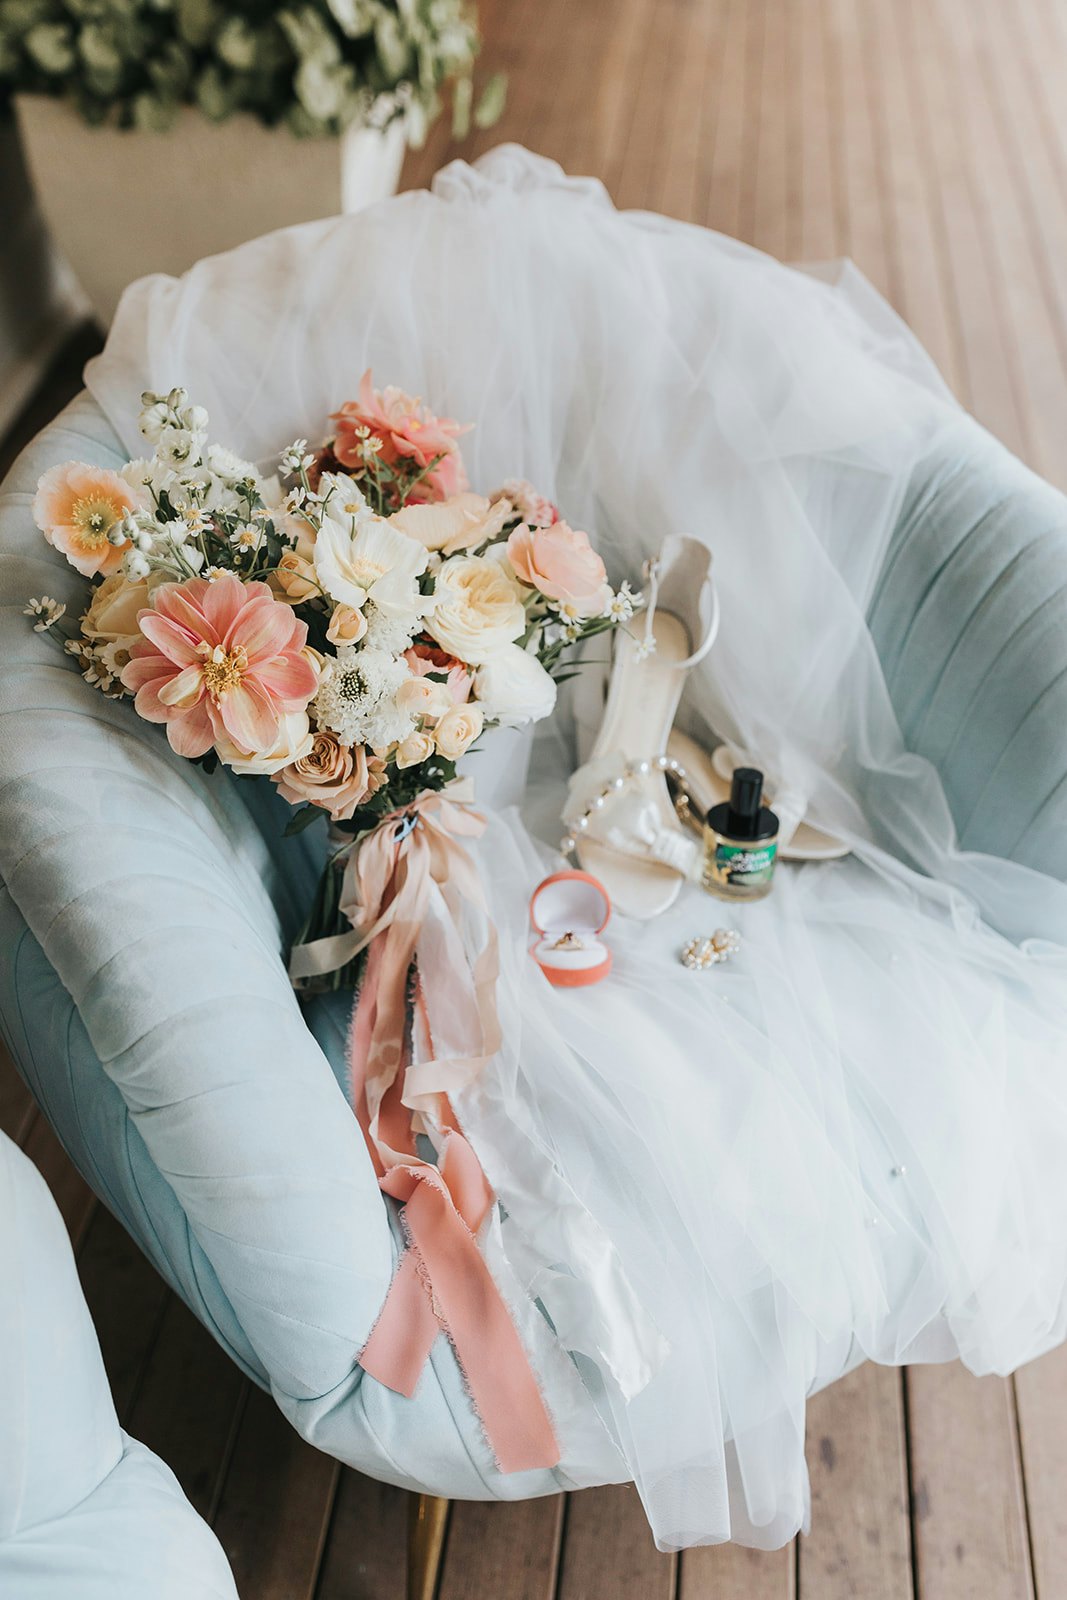 Bouquet, shoes and rings for wedding day